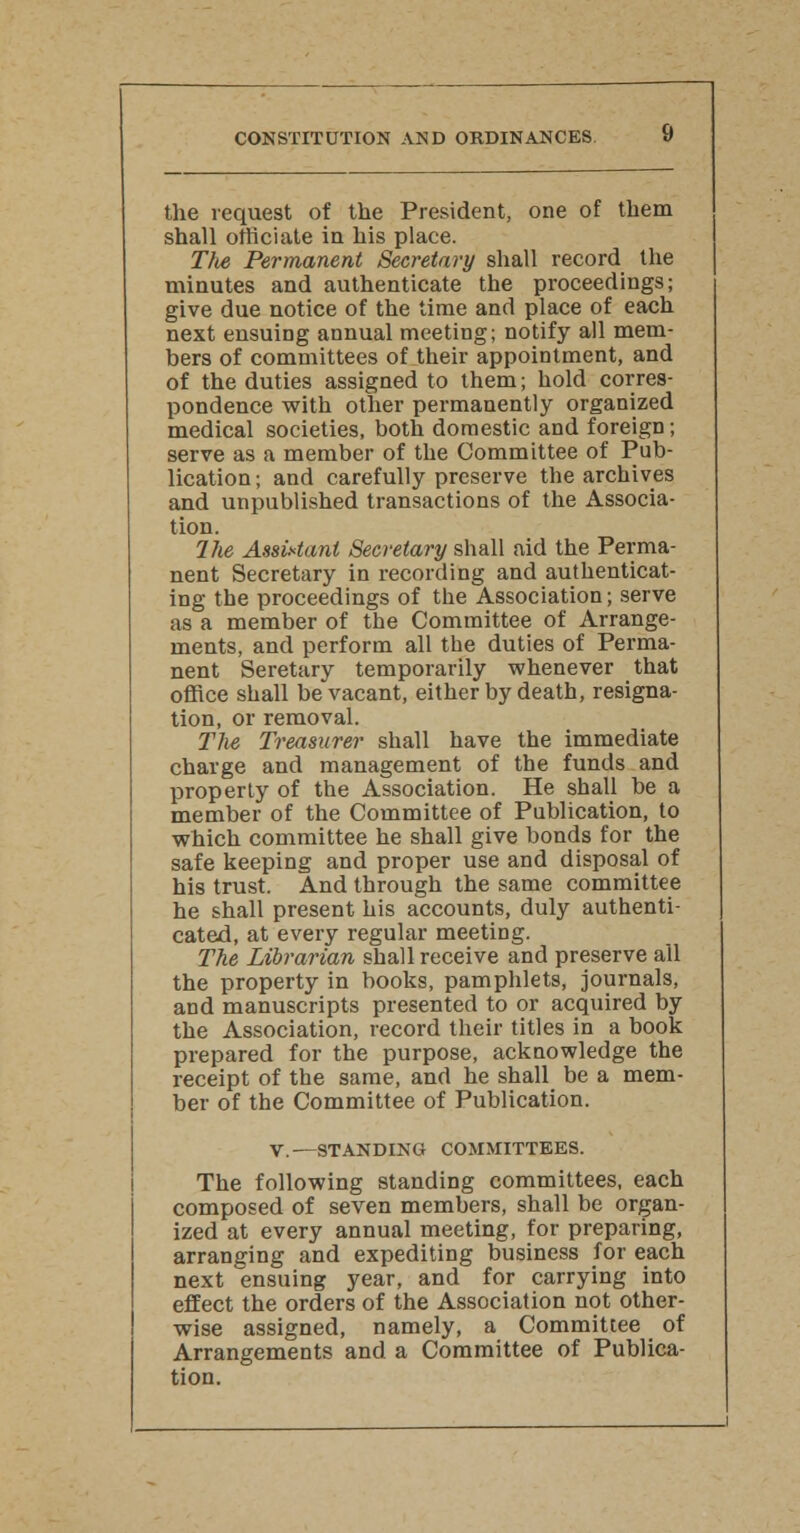 the request of the President, one of them shall officiate in his place. The Permanent Secretary shall record the minutes and authenticate the proceedings; give due notice of the time and place of each next ensuing annual meeting; notify all mem- bers of committees of their appointment, and of the duties assigned to them; hold corres- pondence with other permanently organized medical societies, both domestic and foreign; serve as a member of the Committee of Pub- lication ; and carefully preserve the archives and unpublished transactions of the Associa- tion. Ihe Assistant Secretary shall aid the Perma- nent Secretary in recording and authenticat- ing the proceedings of the Association; serve as a member of the Committee of Arrange- ments, and perform all the duties of Perma- nent Seretary temporarily whenever that office shall beVacant, either by death, resigna- tion, or removal. The Treasurer shall have the immediate charge and management of the funds and property of the Association. He shall be a member of the Committee of Publication, to which committee he shall give bonds for the safe keeping and proper use and disposal of his trust. And through the same committee he shall present his accounts, duly authenti- cated, at every regular meeting. The Librarian shall receive and preserve all the property in books, pamphlets, journals, and manuscripts presented to or acquired by the Association, record their titles in a book prepared for the purpose, acknowledge the receipt of the same, and he shall be a mem- ber of the Committee of Publication. V.—STANDING COMMITTEES. The following standing committees, each composed of seven members, shall be organ- ized at every annual meeting, for preparing, arranging and expediting business for each next ensuing year, and for carrying into effect the orders of the Association not other- wise assigned, namely, a Committee of Arrangements and a Committee of Publica- tion.